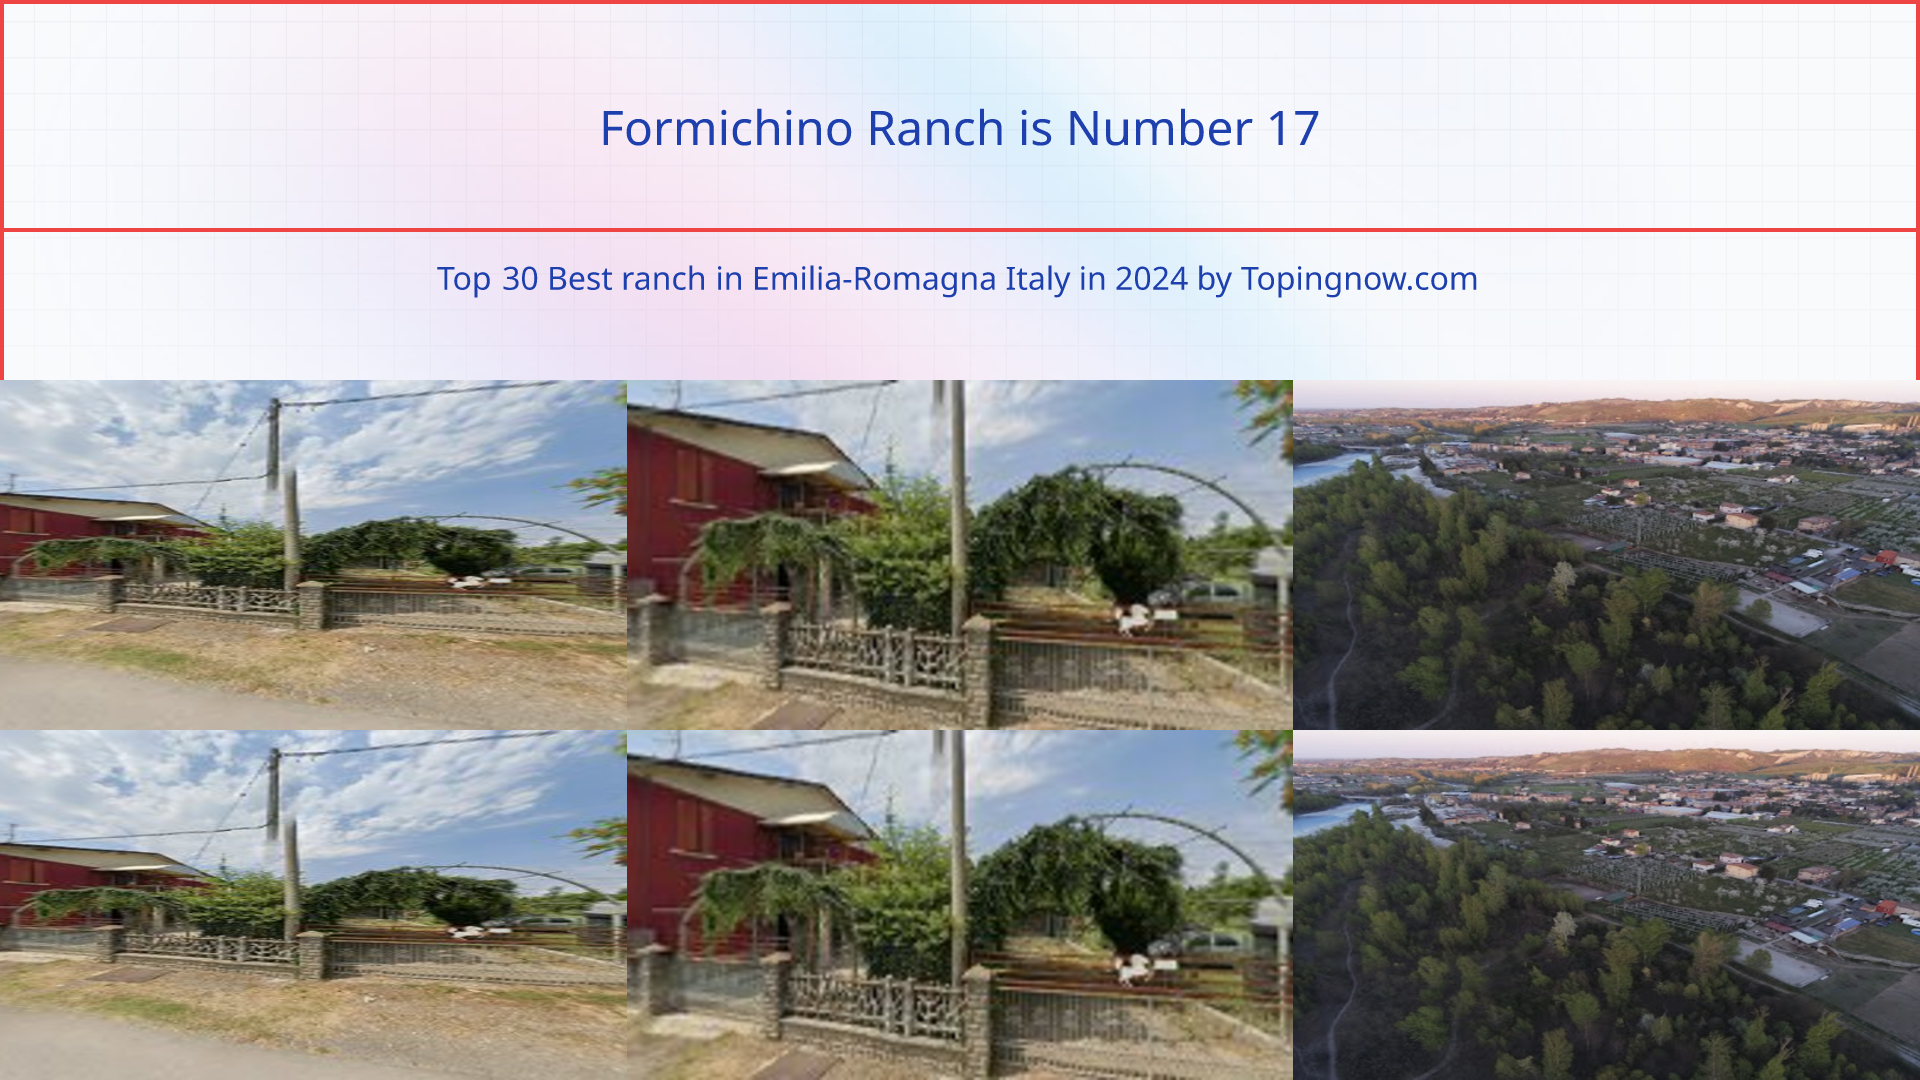 Formichino Ranch: Top 30 Best ranch in Emilia-Romagna Italy in 2024